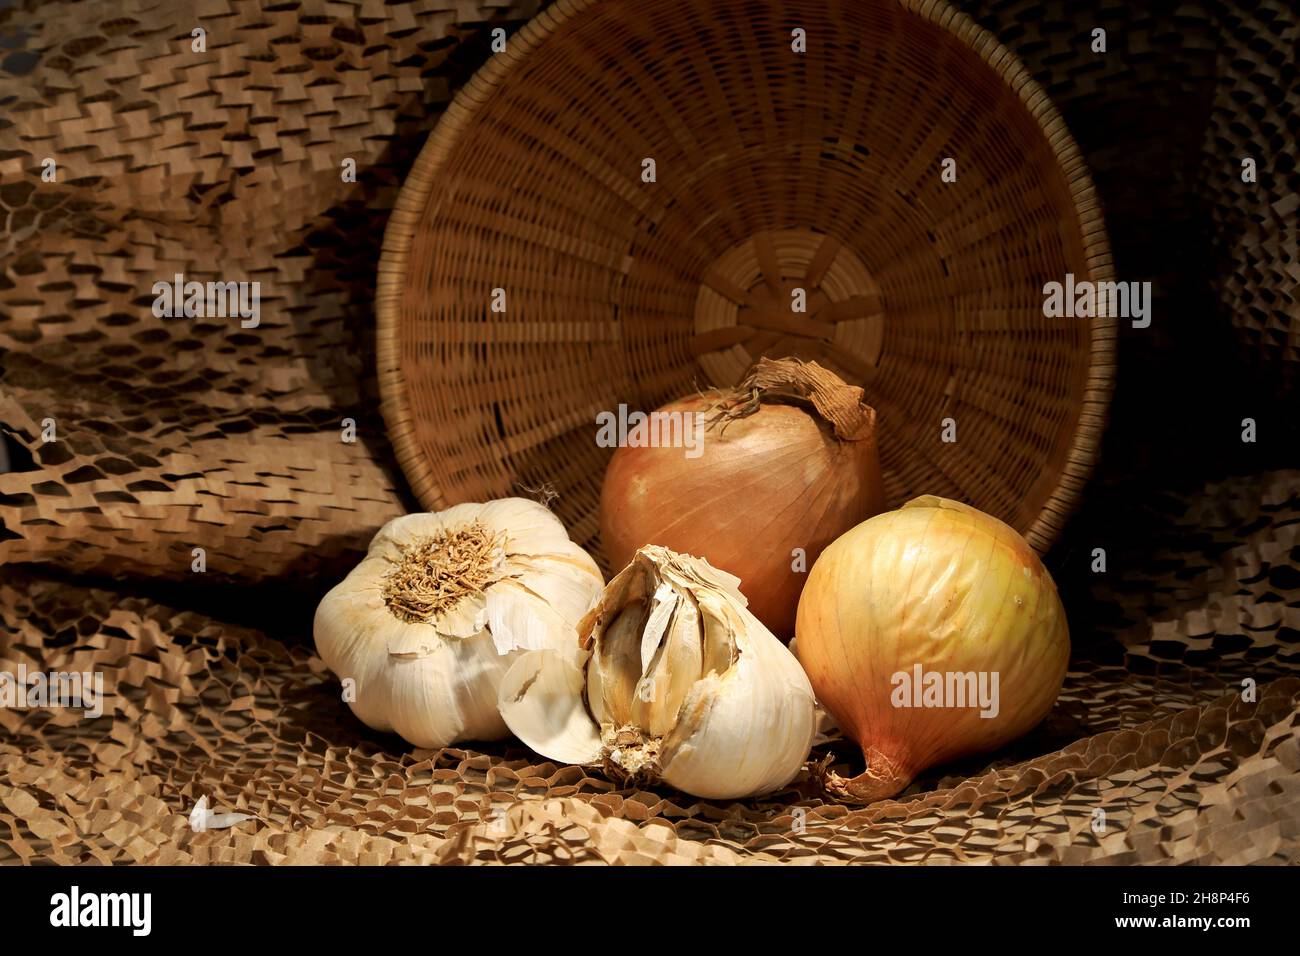 Onion and garlic with a brown basket on a table Stock Photo